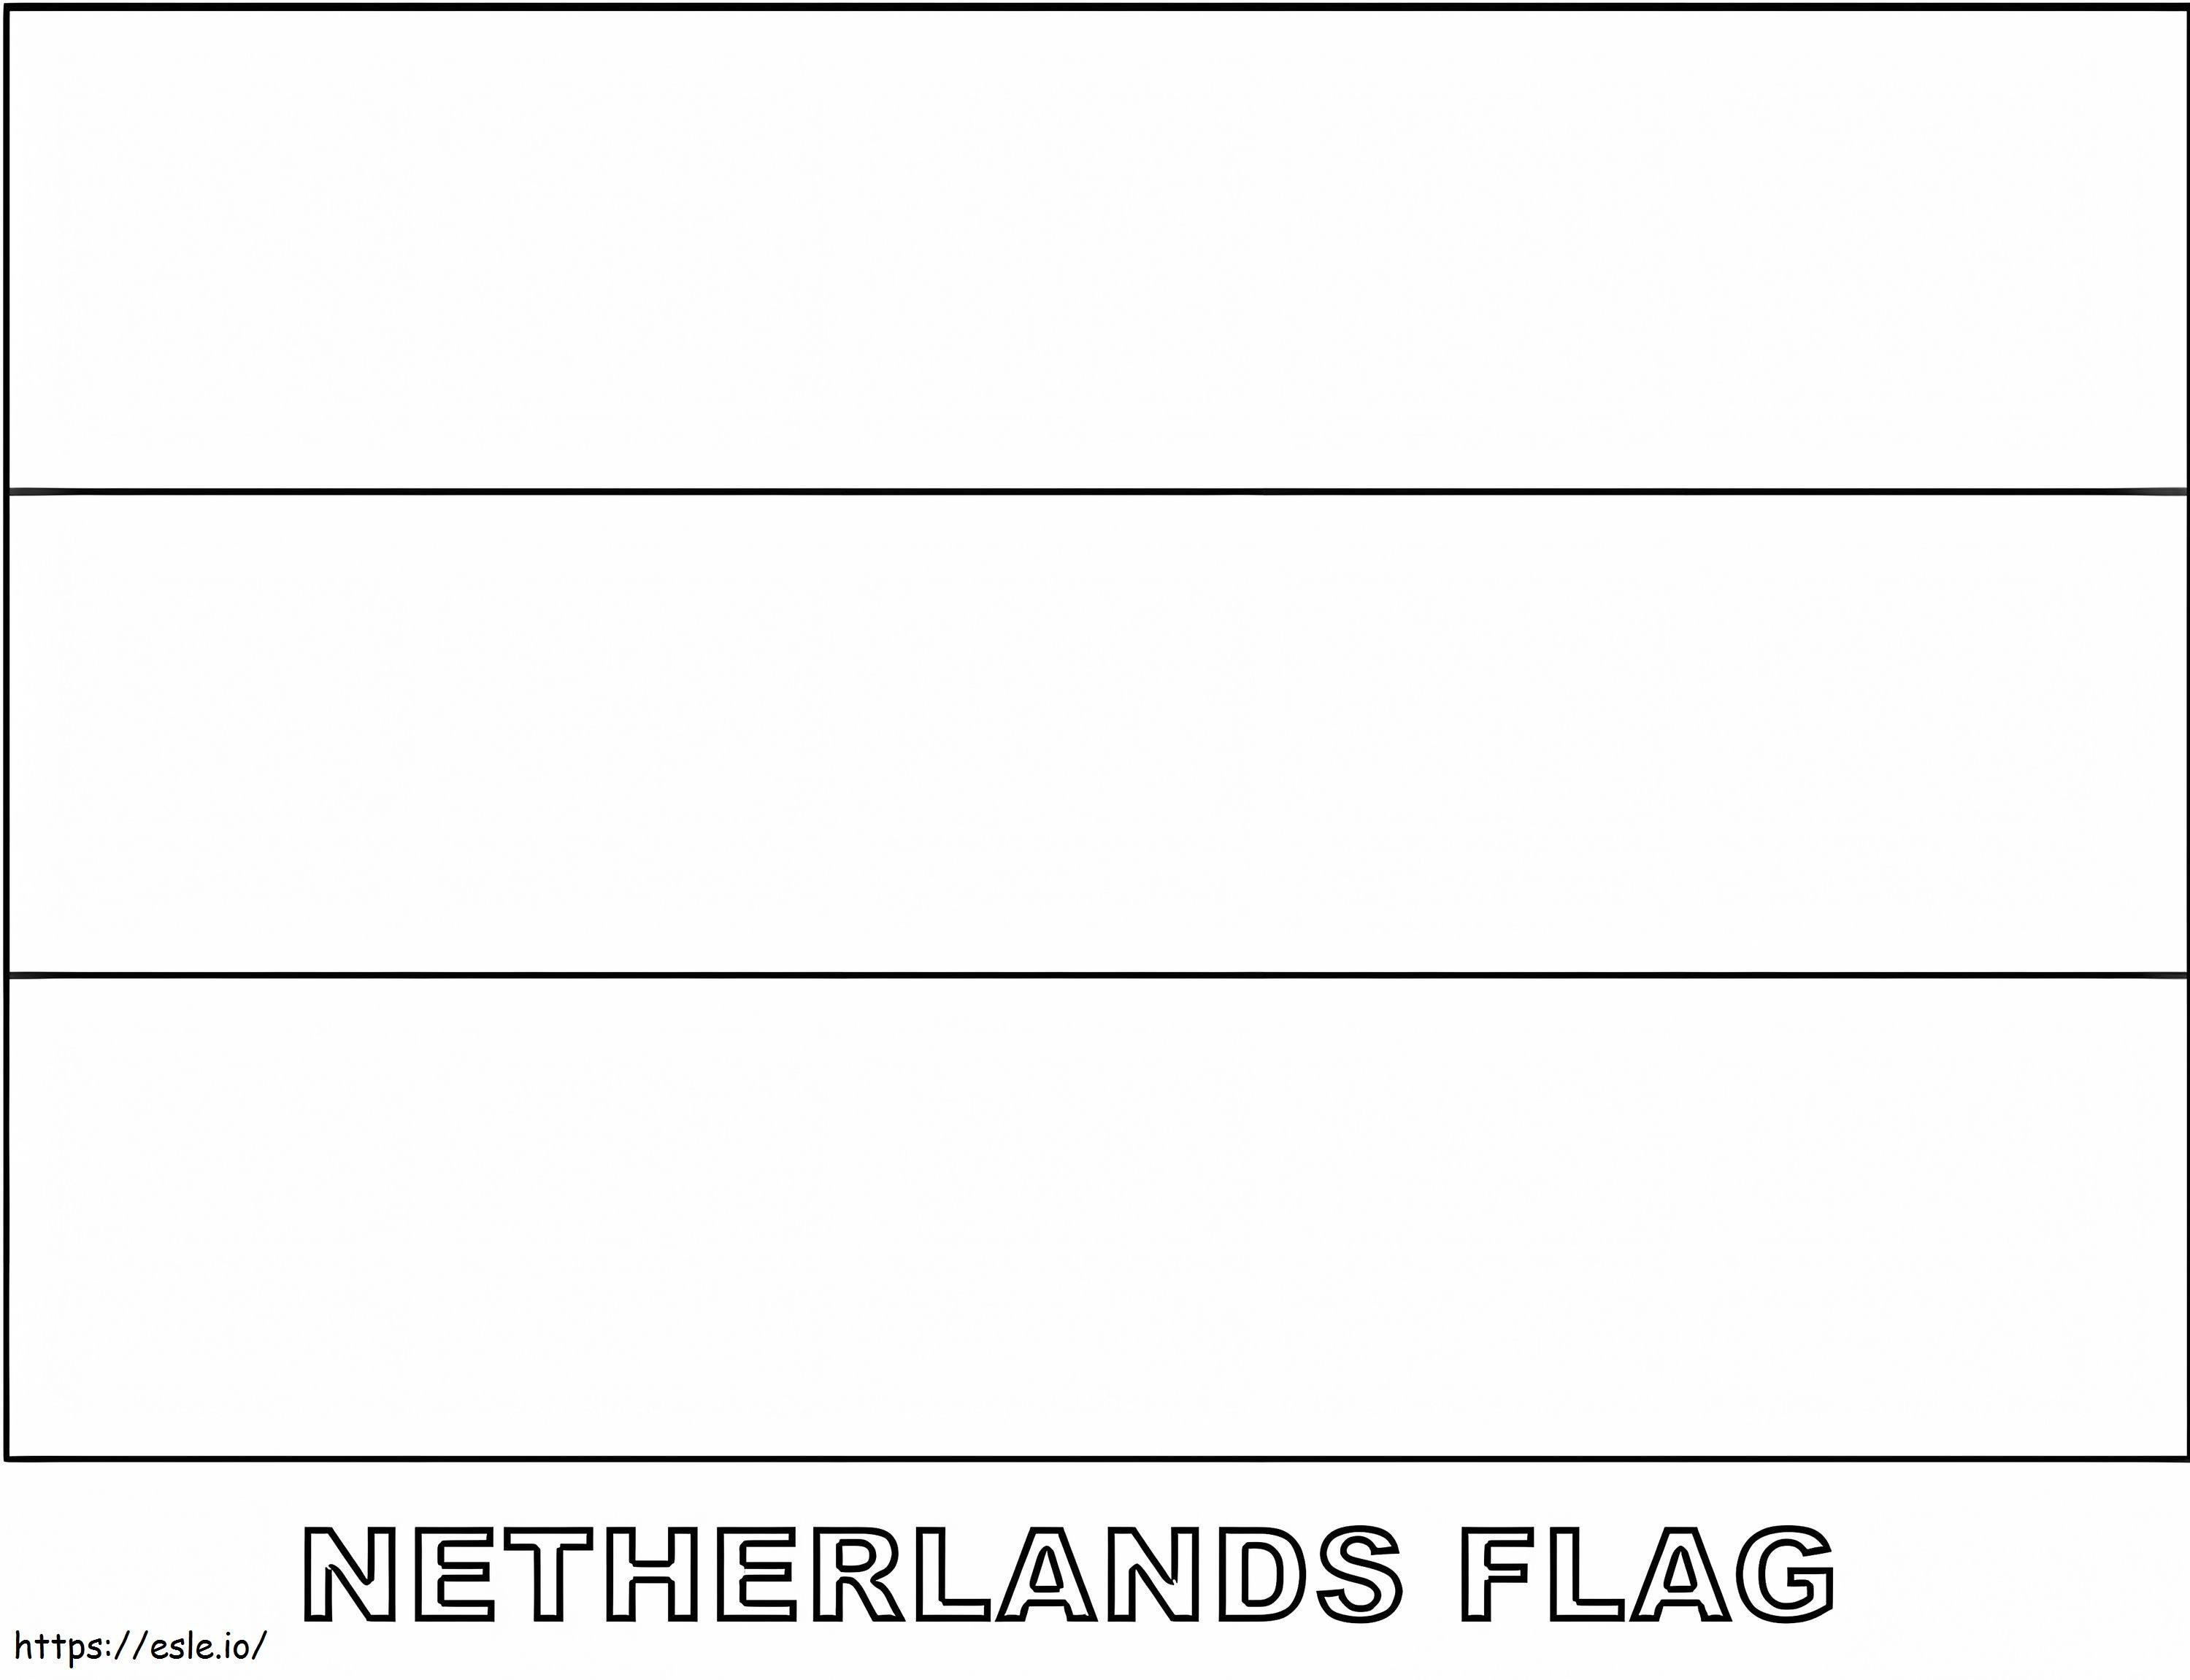 The Netherlands Flag coloring page